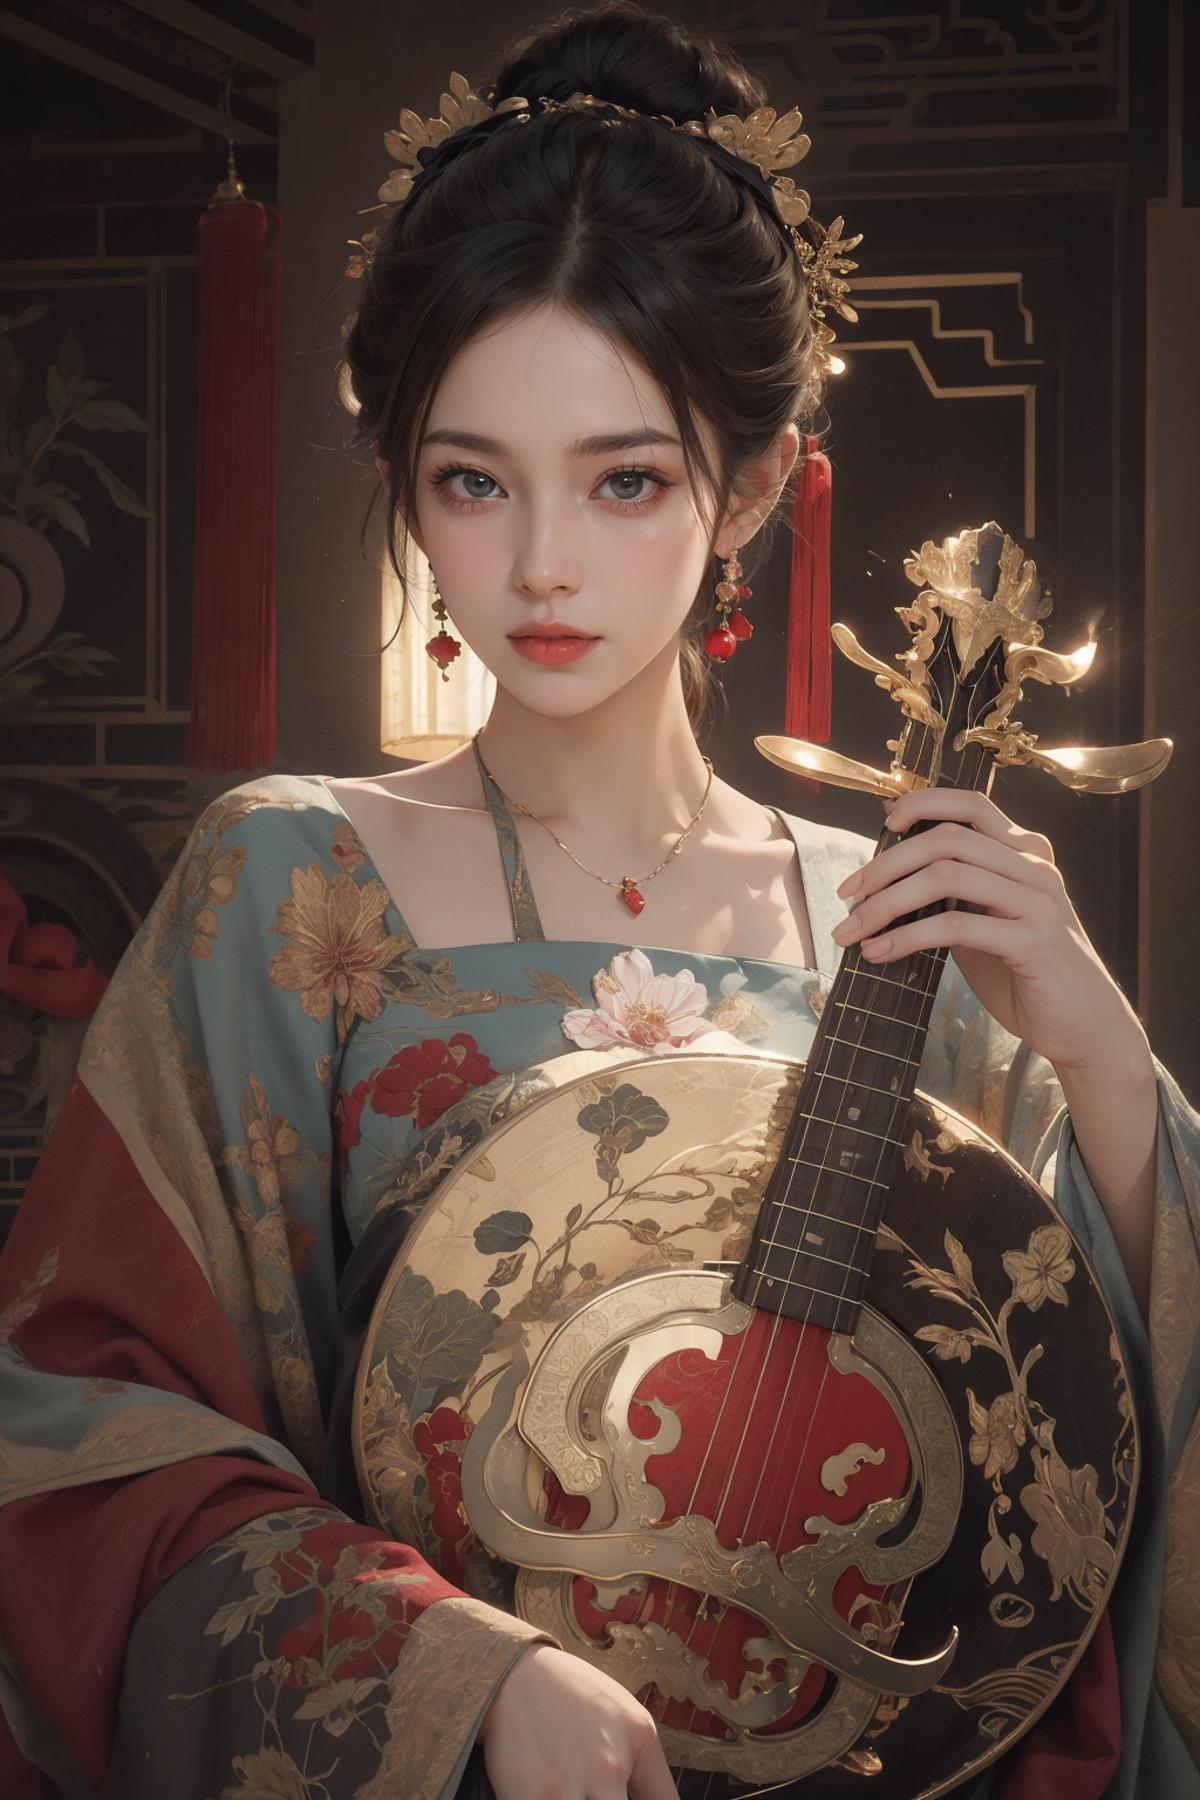 A beautiful Asian woman with long black hair is holding a guitar and posing for a photo. She is wearing a blue dress and a gold necklace, and her outfit is adorned with flowers. The guitar is quite large, taking up a significant portion of the image.